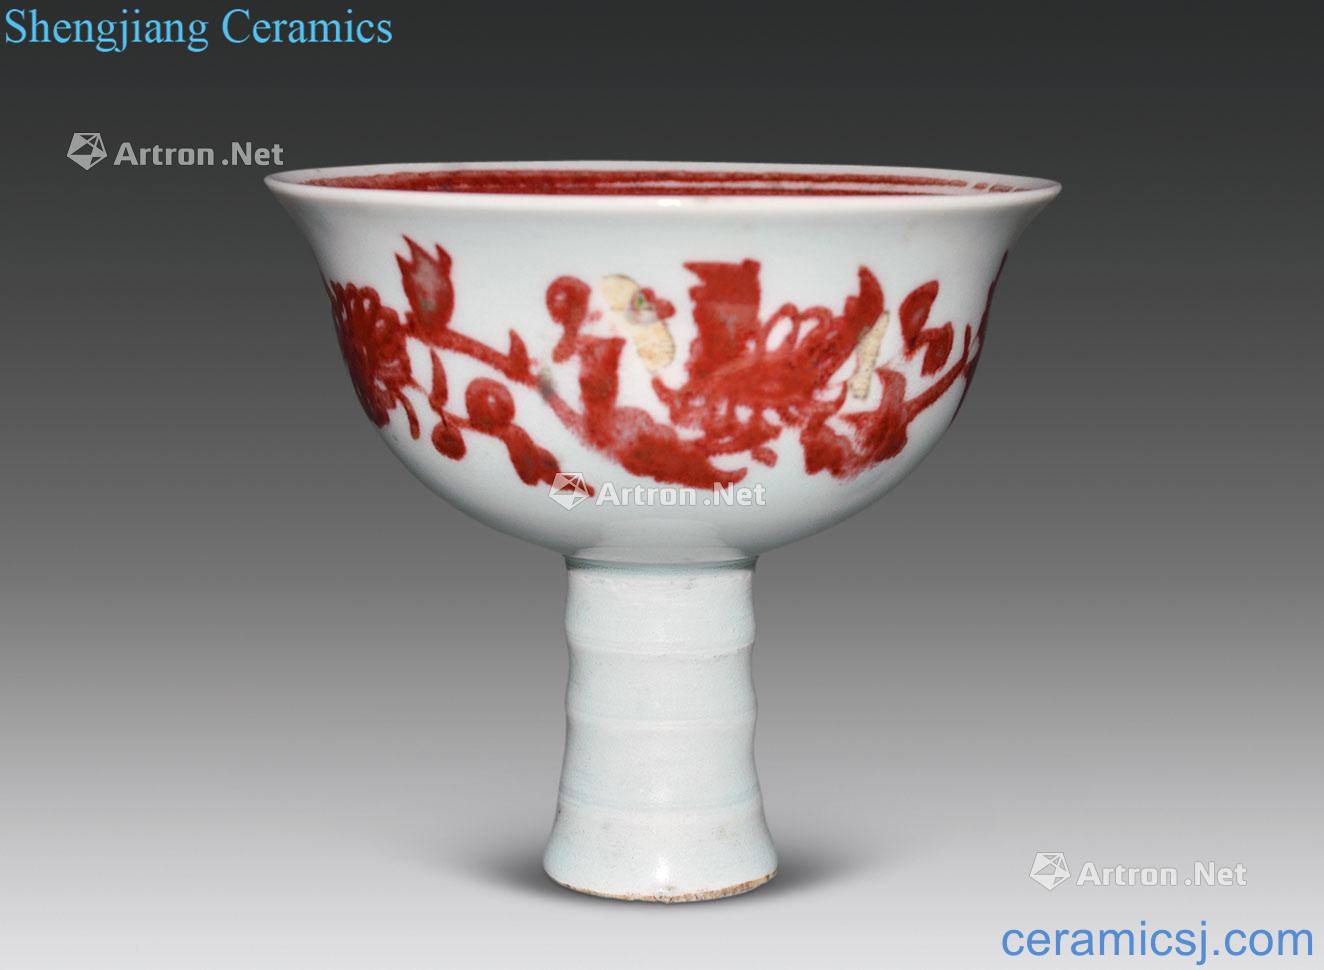 The yuan dynasty Youligong flower footed bowl